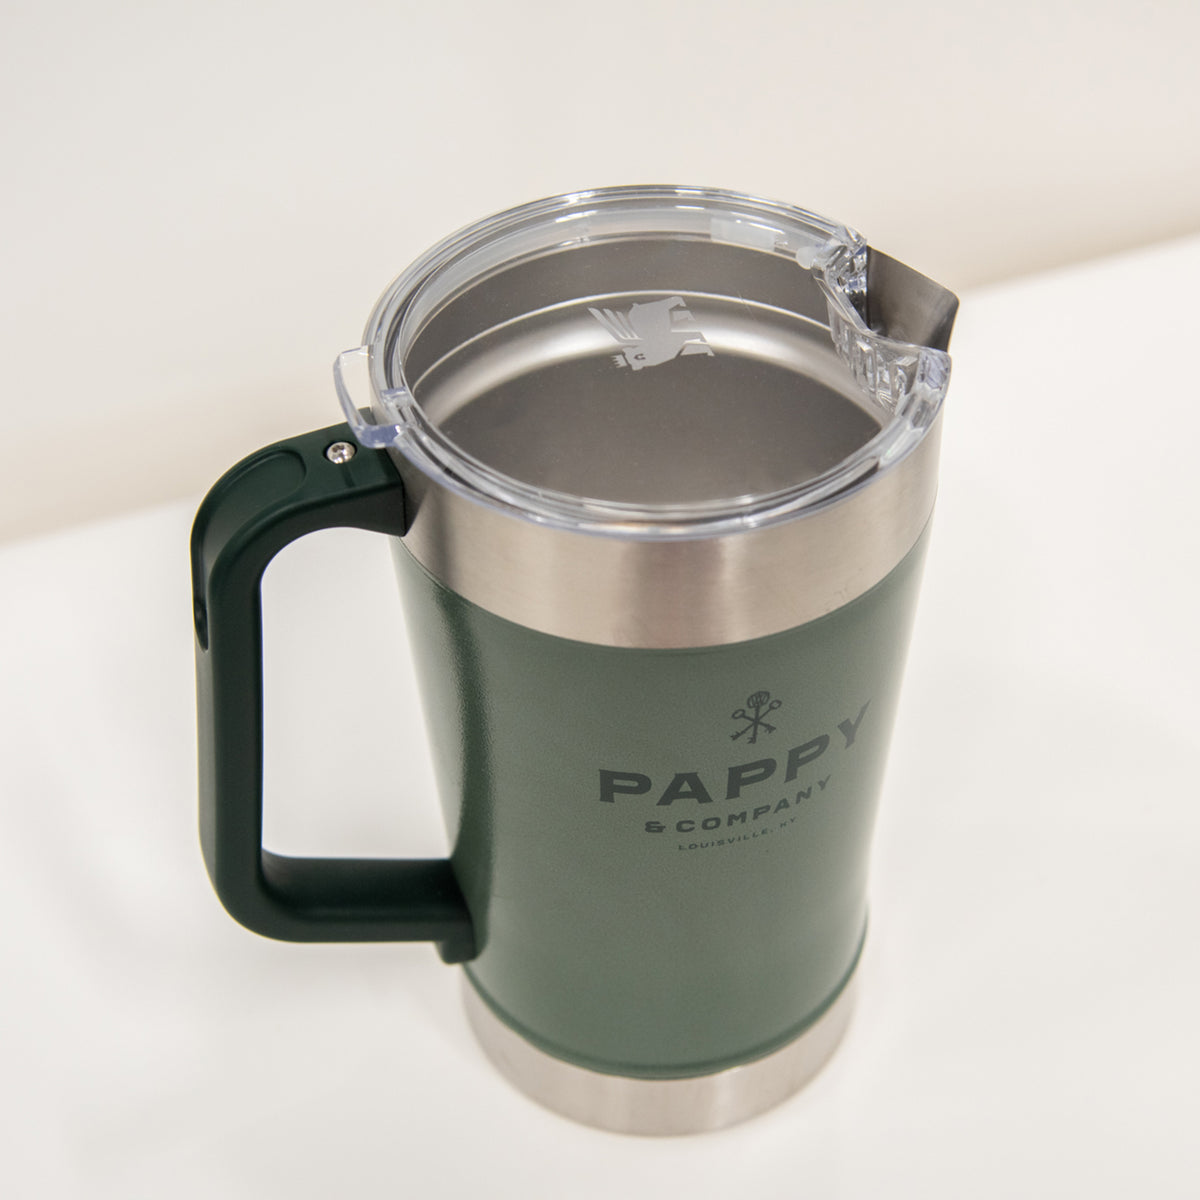 Stanley x Pappy &amp; Co Classic Stay Chill Pitcher